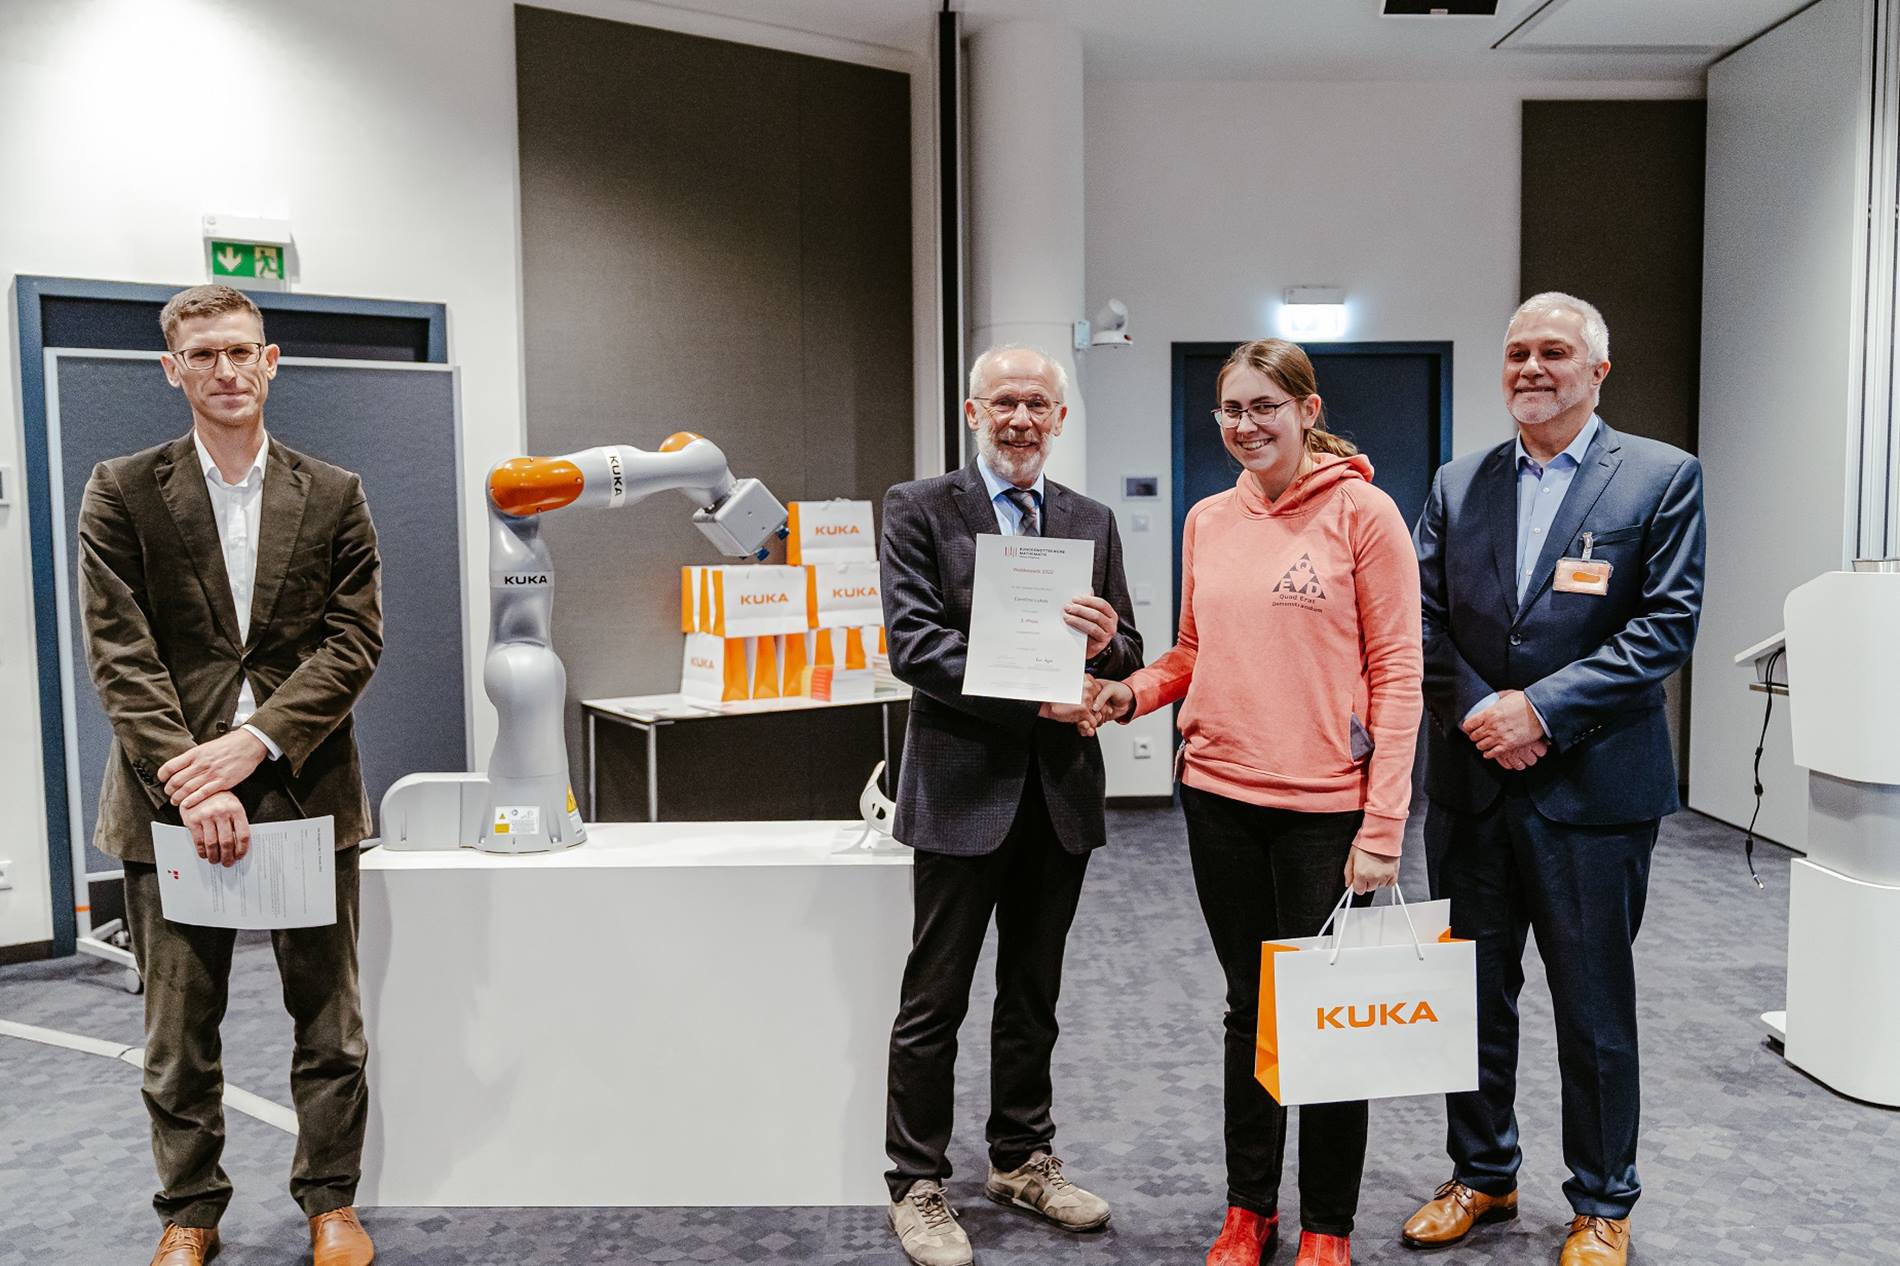 At the award ceremony of the German National Mathematics Competition, a winner is presented with her award, with a KUKA robot LBRiisy in the picture.